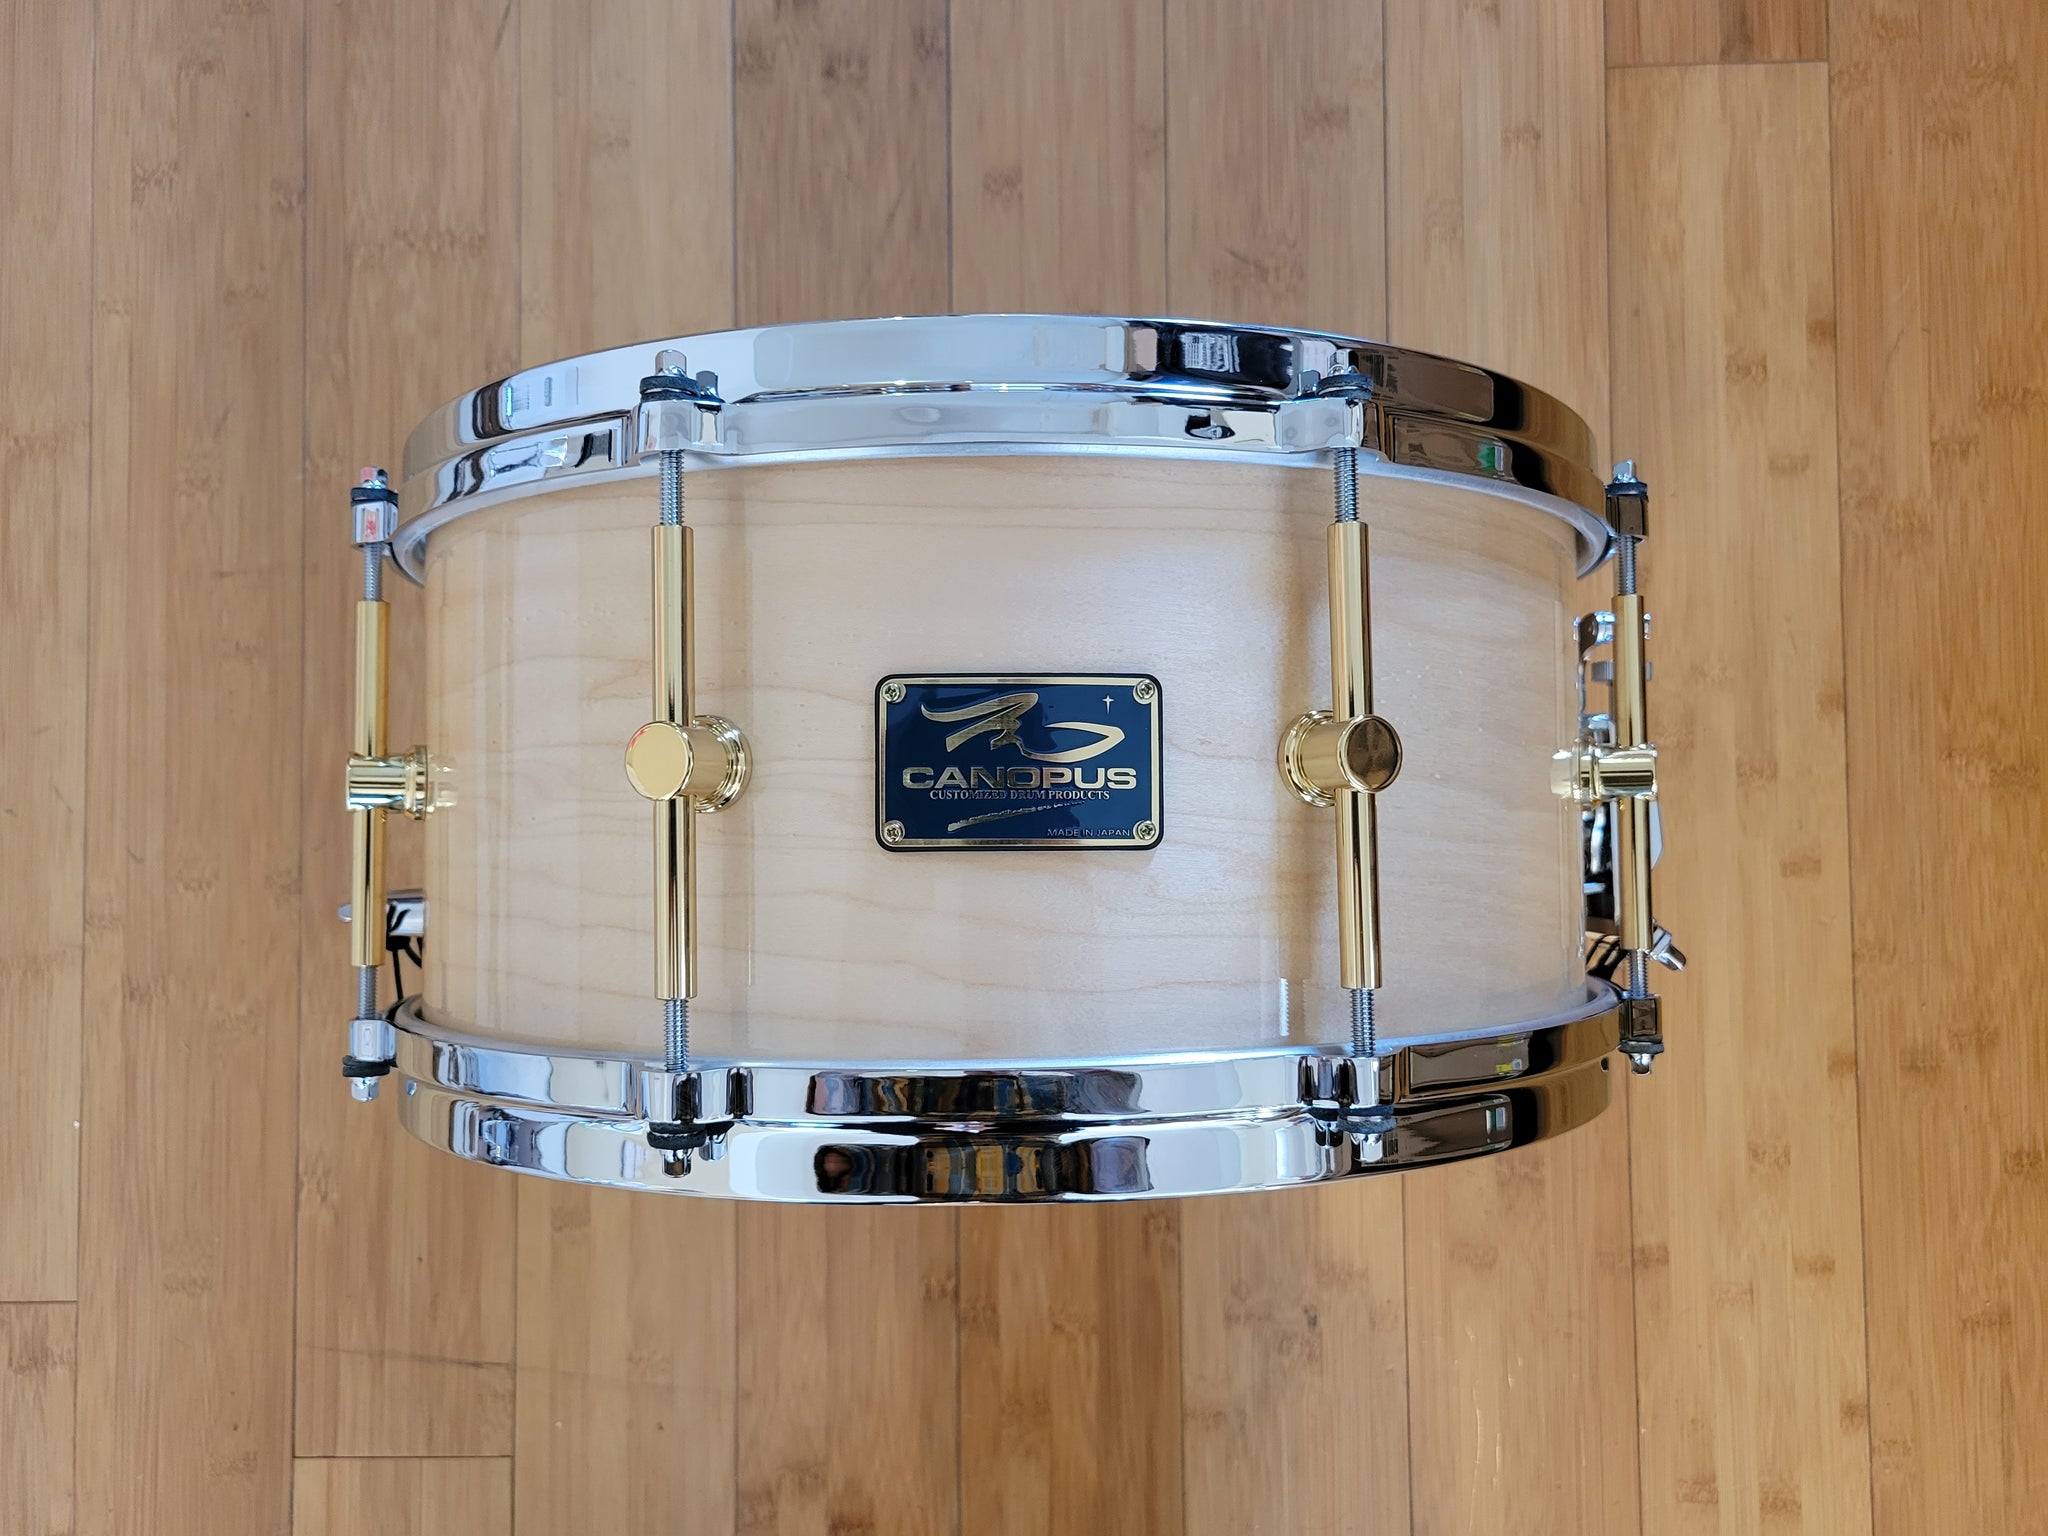 Snares - Canopus Drums 6.5x14 "The Maple" Snare Drum